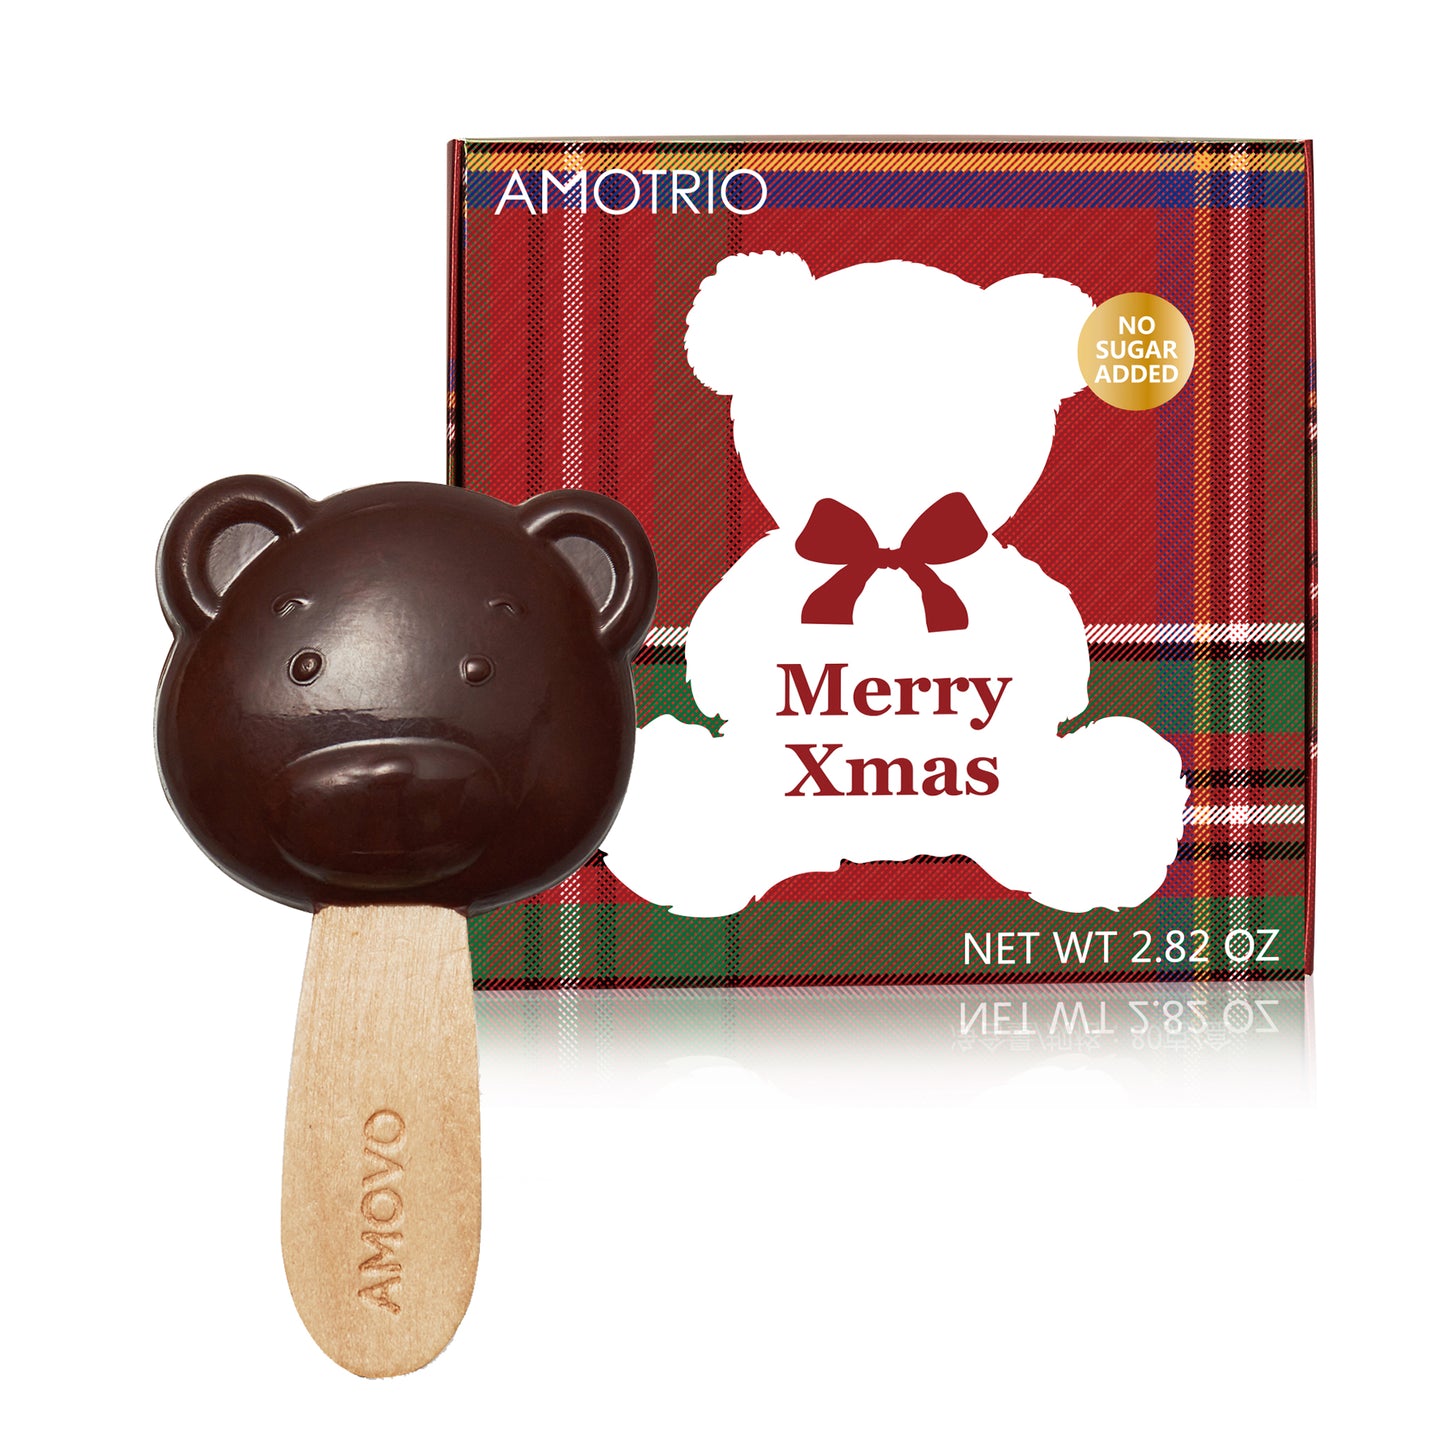 Photo of a bear shape dark chocolate lollipop and with the packaging behind